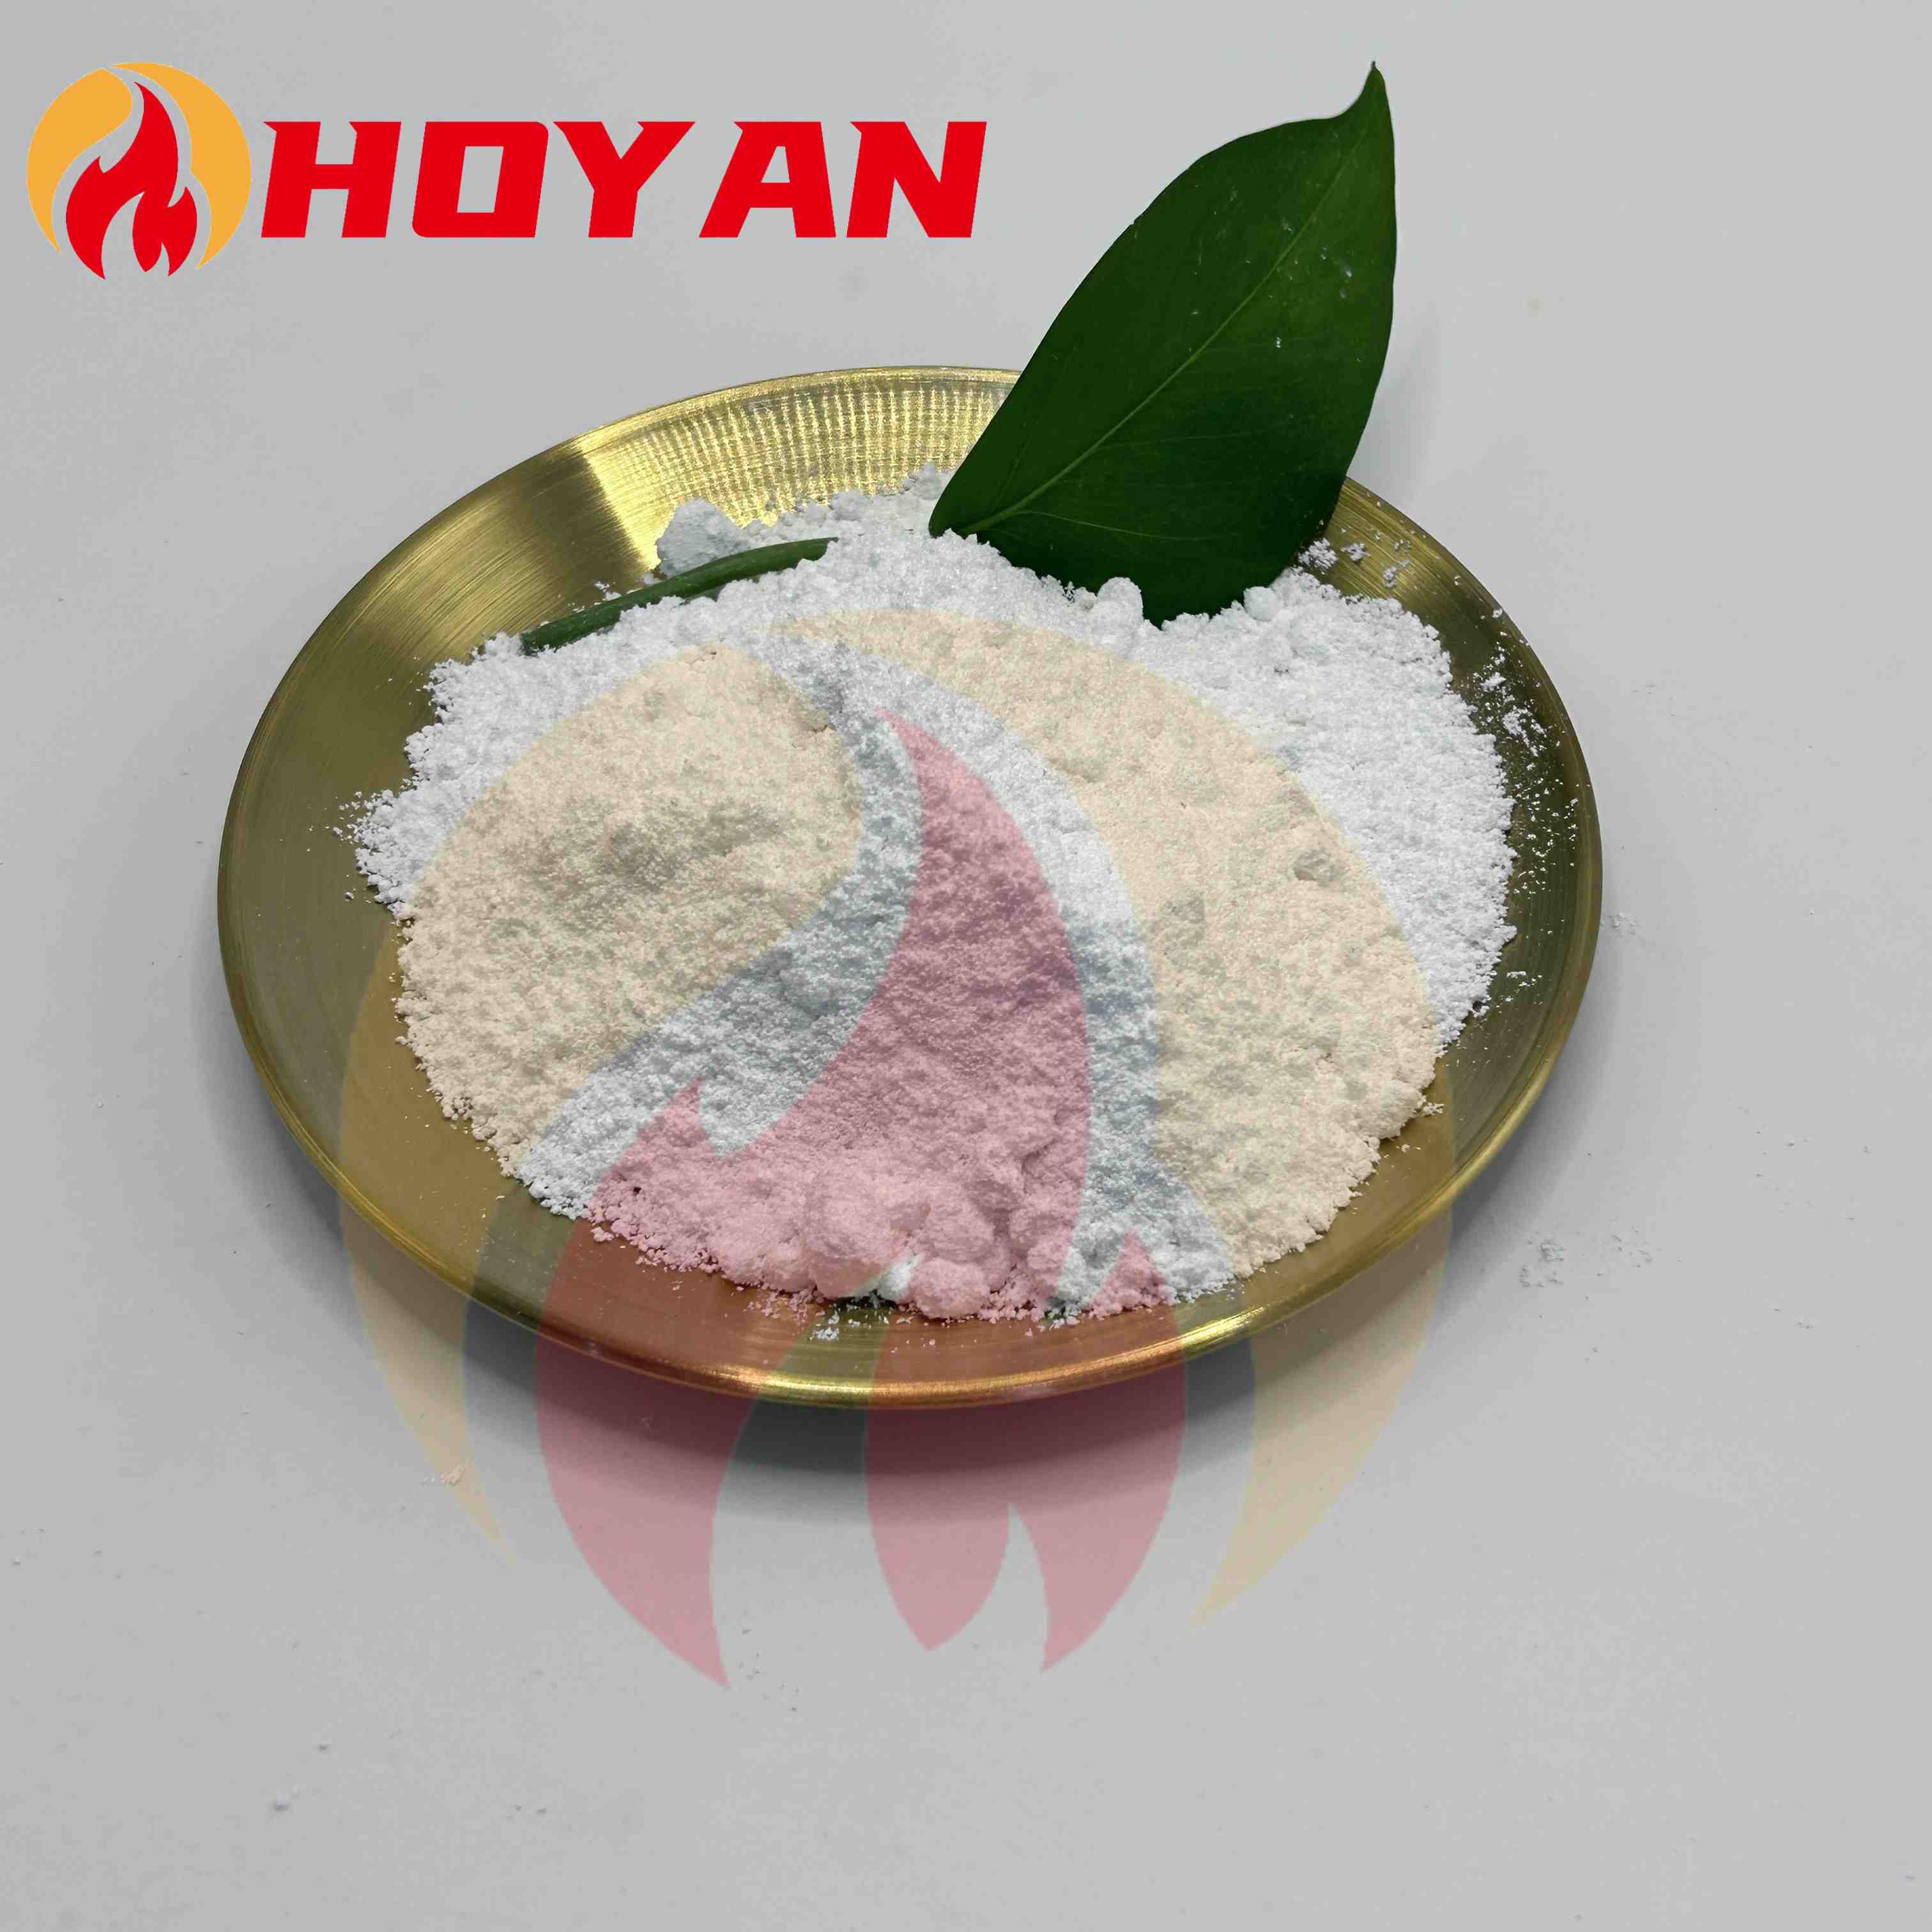 Free Sample Provide Lgd-3033 Powder CAS 917891-35-1 with Safe Delivery